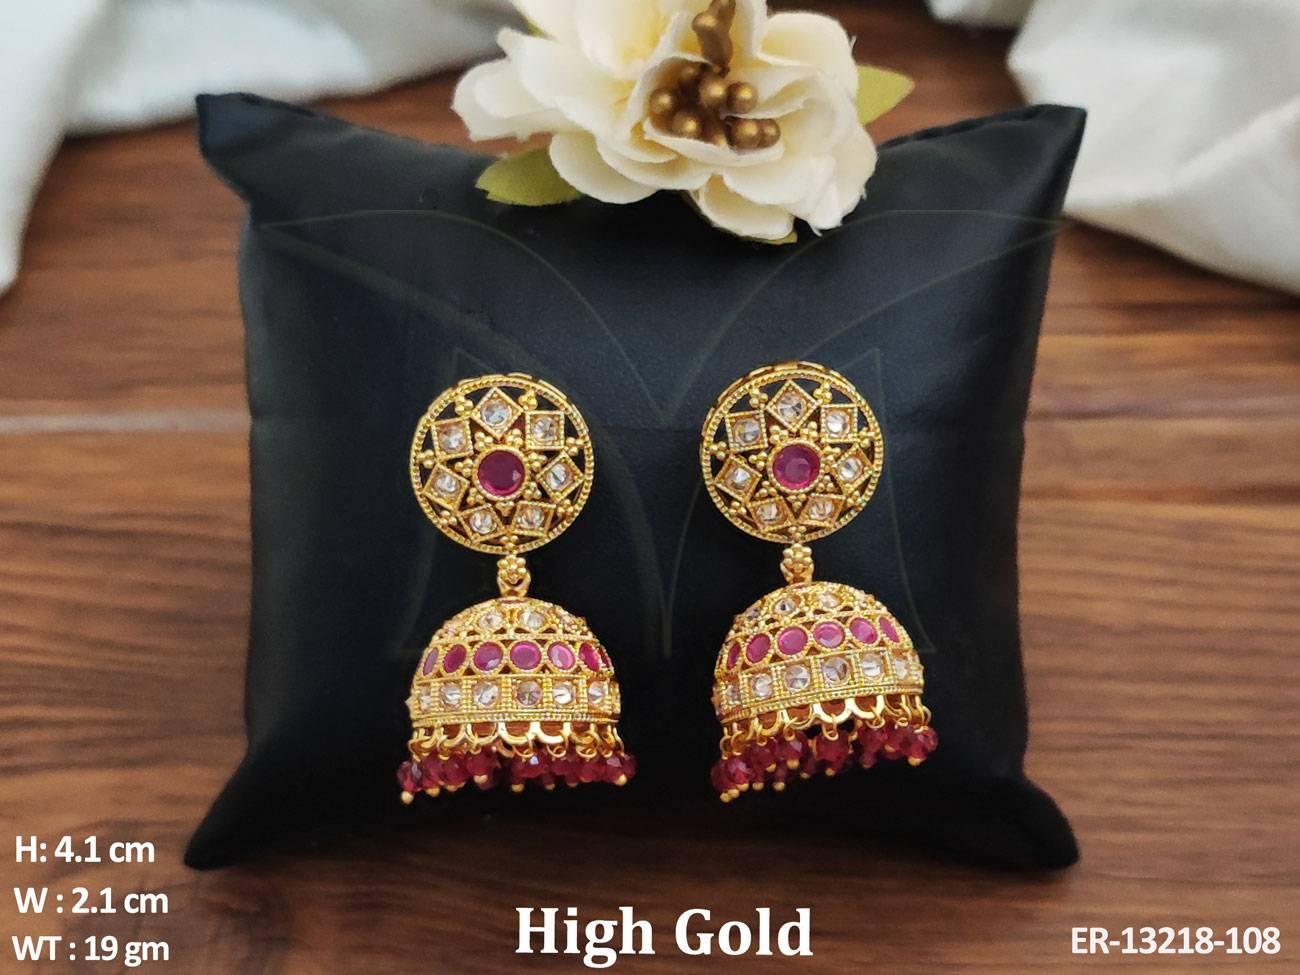 Expertly crafted from brass metal, these Fancy Designer Jhumka Earrings feature a luxurious High Gold Polish for a sophisticated look.